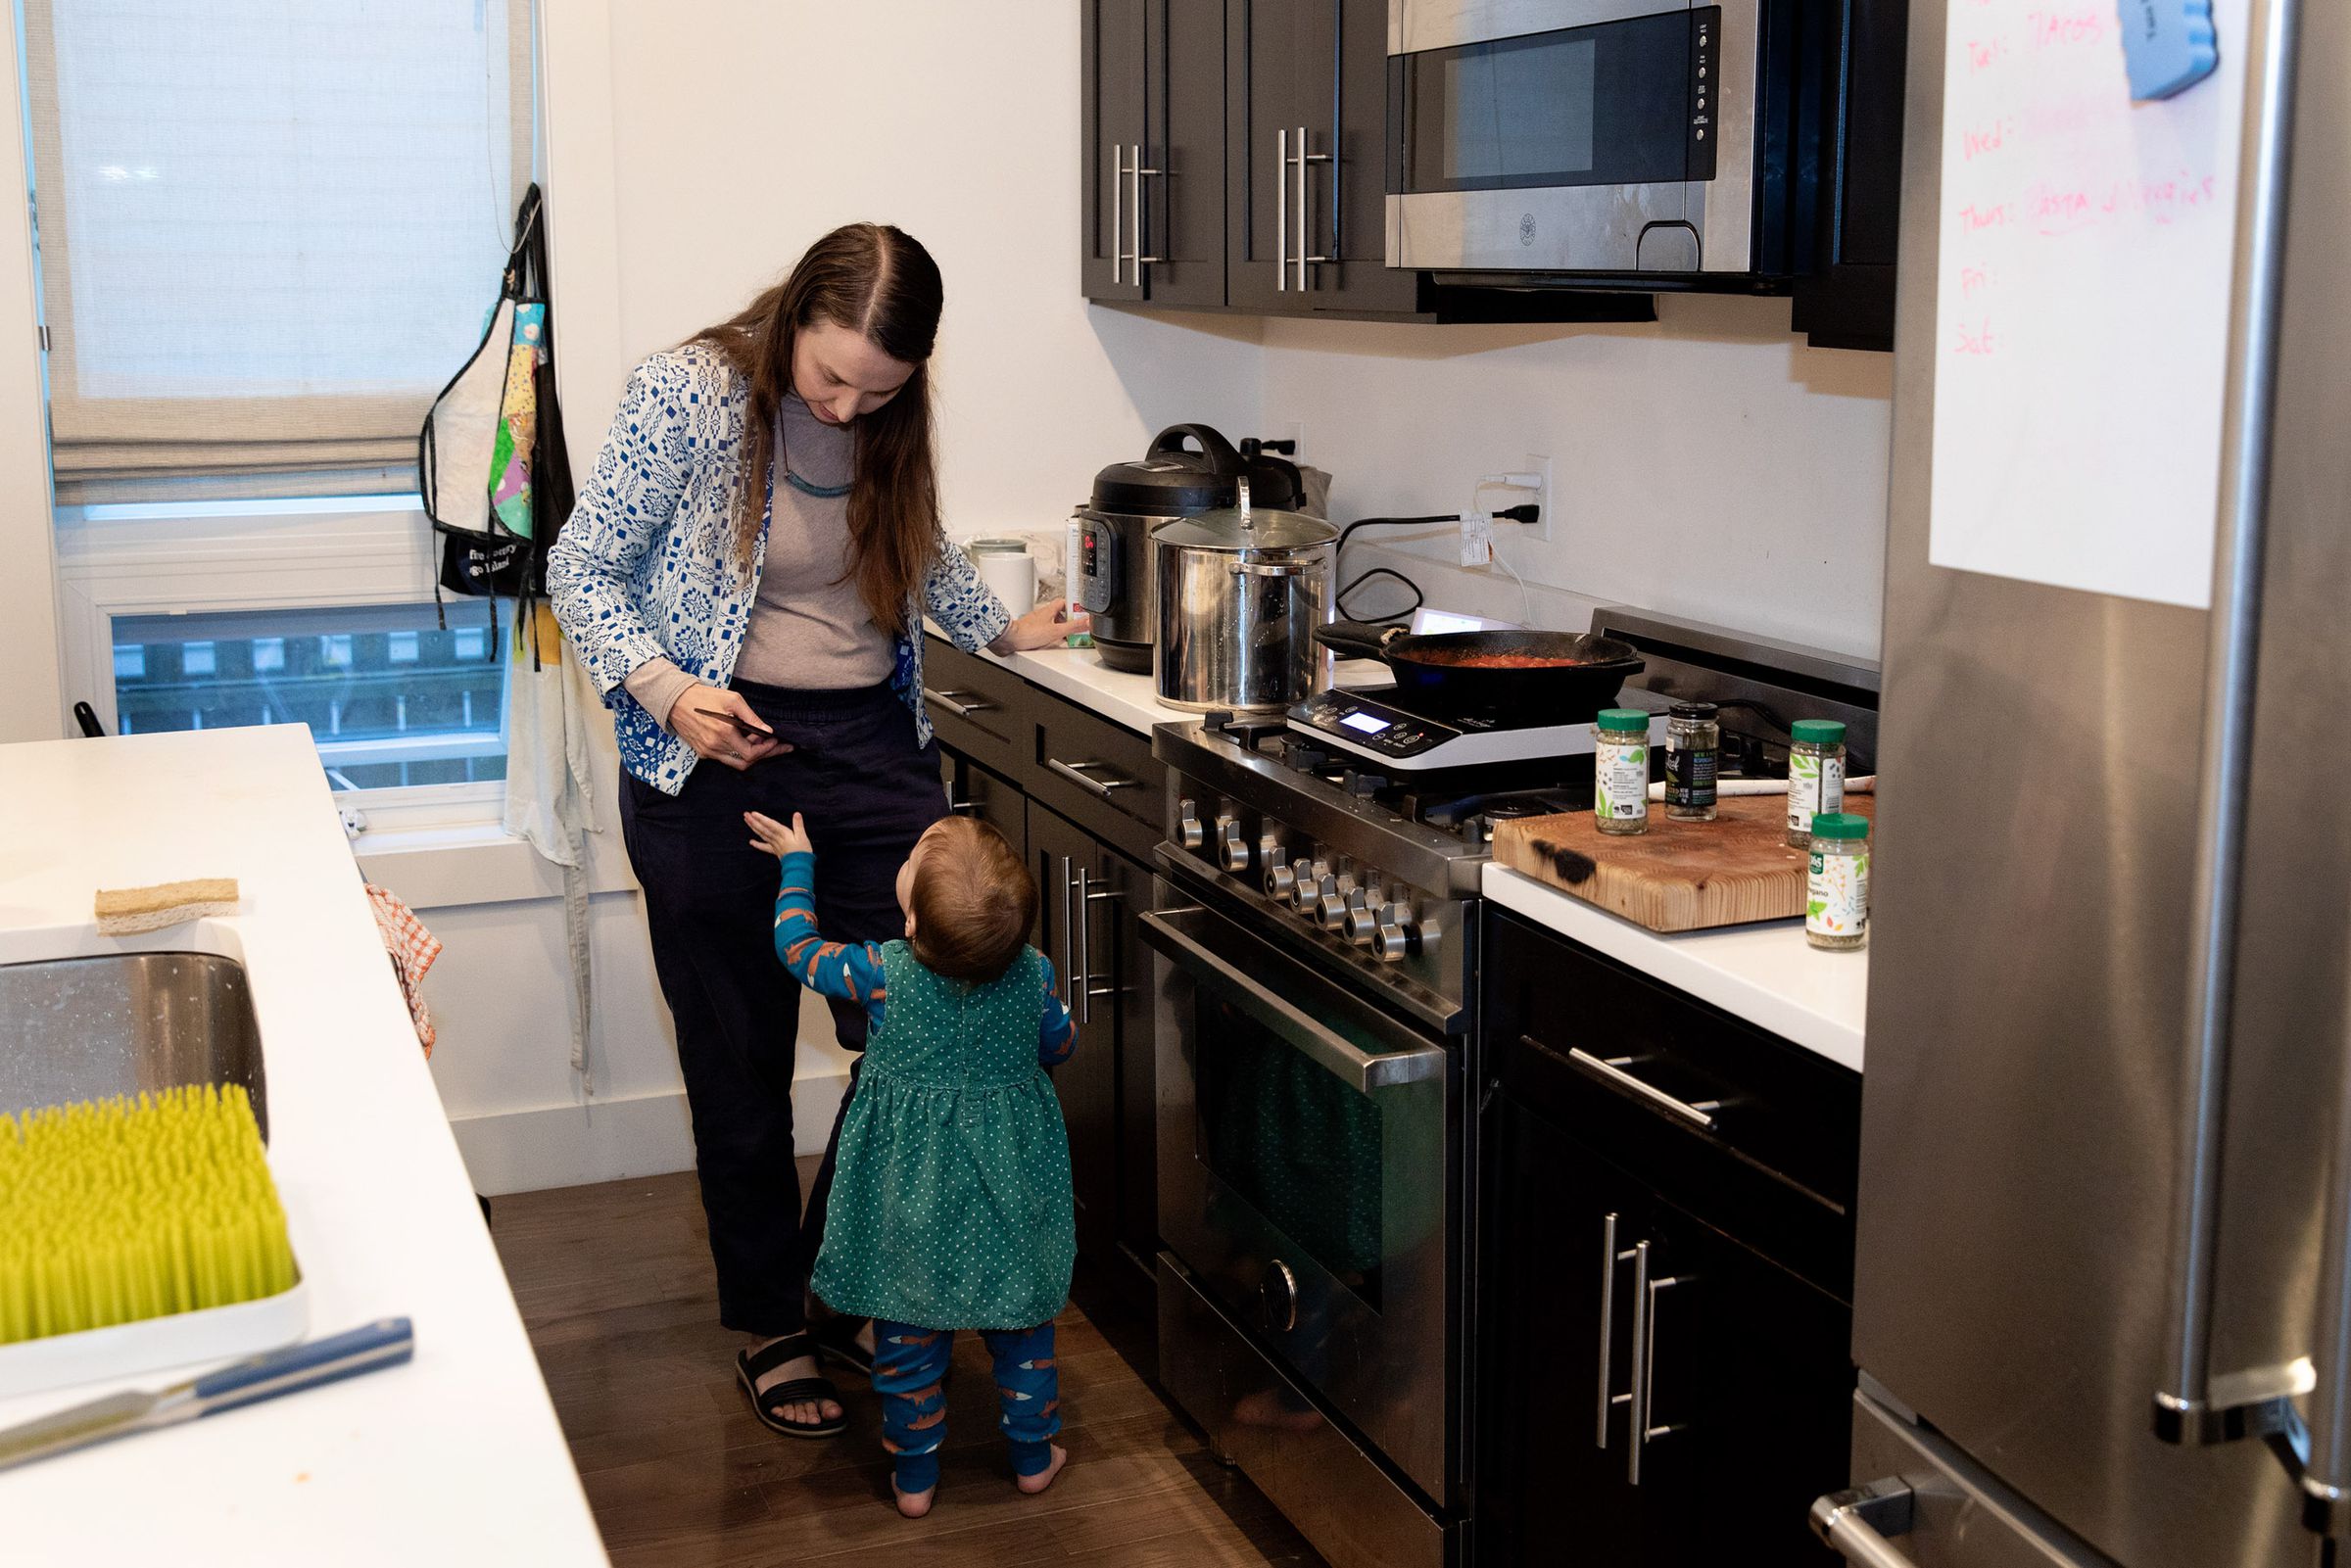 A person with long hair leans over to speak to a toddler who we see from behind. They are standing in a narrow kitchen in front of the stove.